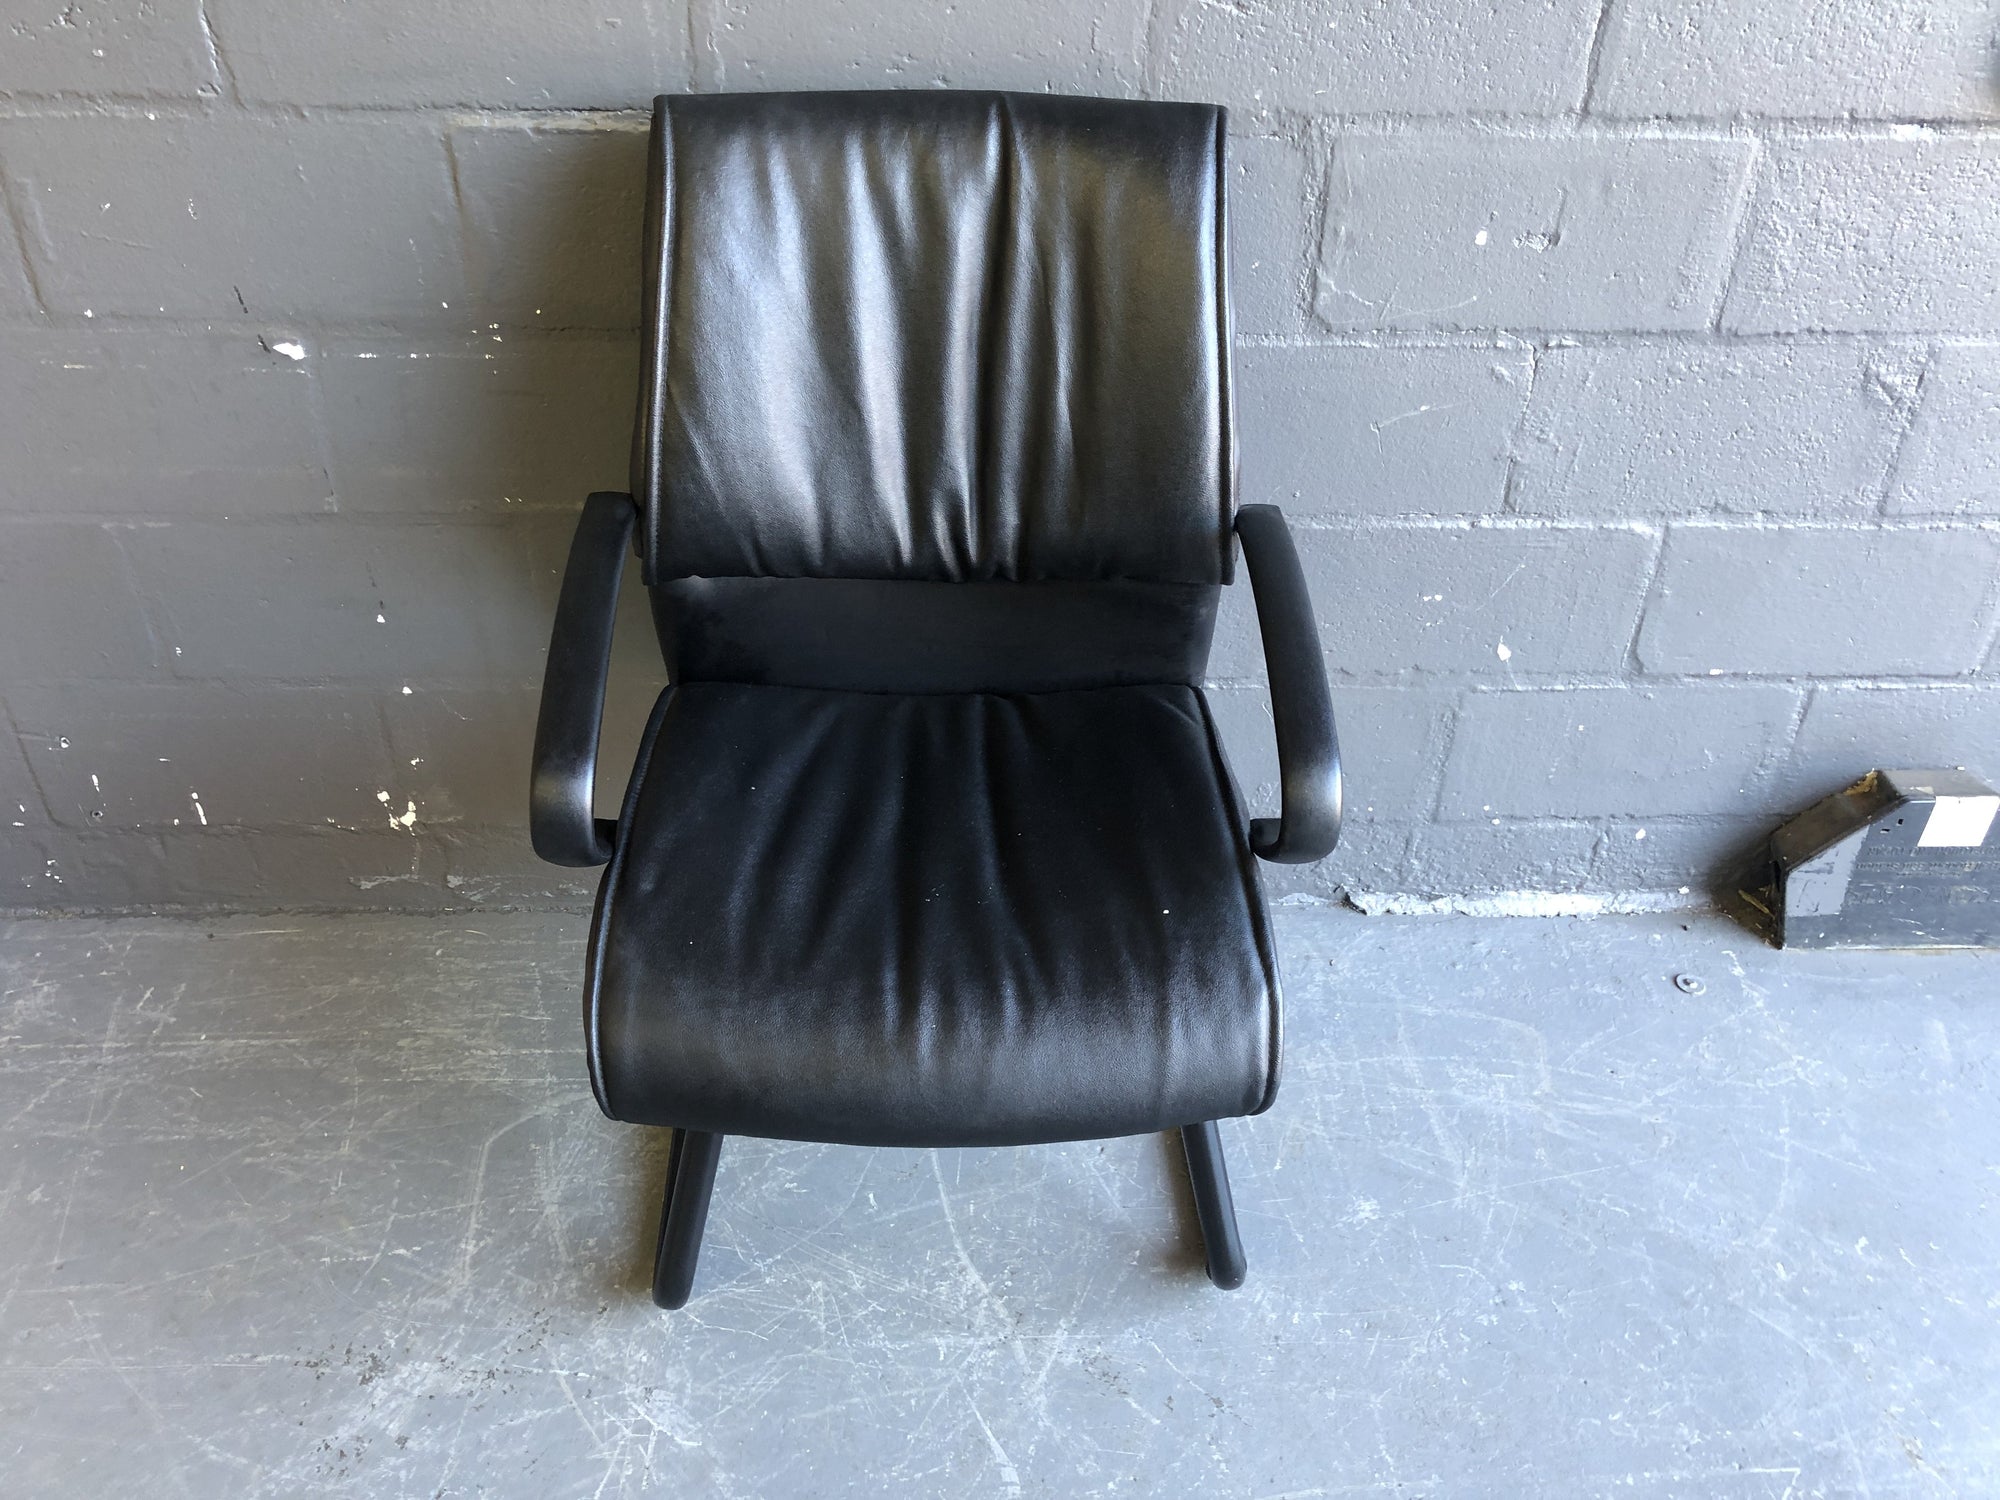 Pleather Visitor Chair - 2ndhandwarehouse.com